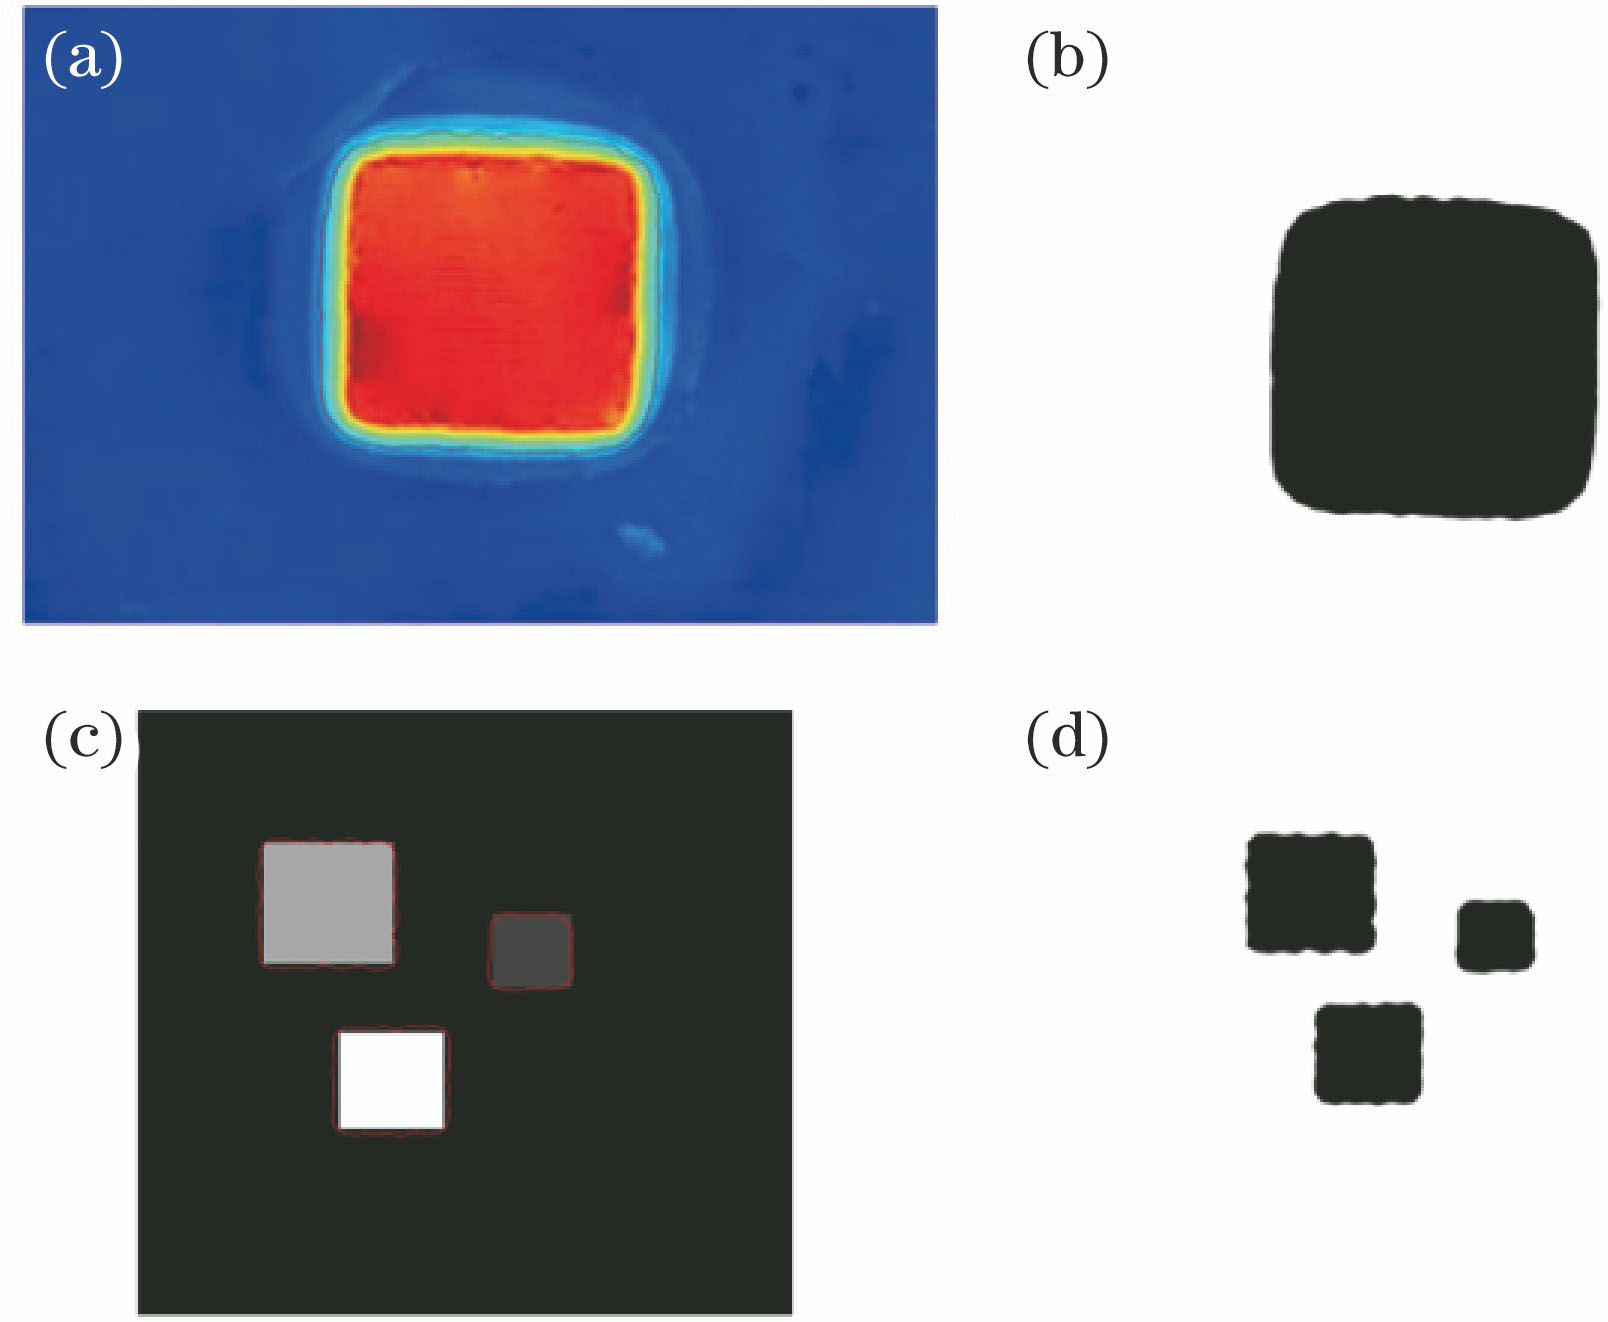 Level set segmentation results. (a) Measured square object image after segmentation; (b) binary image of Fig. 2(a); (c) simulated rectangular object image after segmentation; (d) binary image of Fig. 2(c)